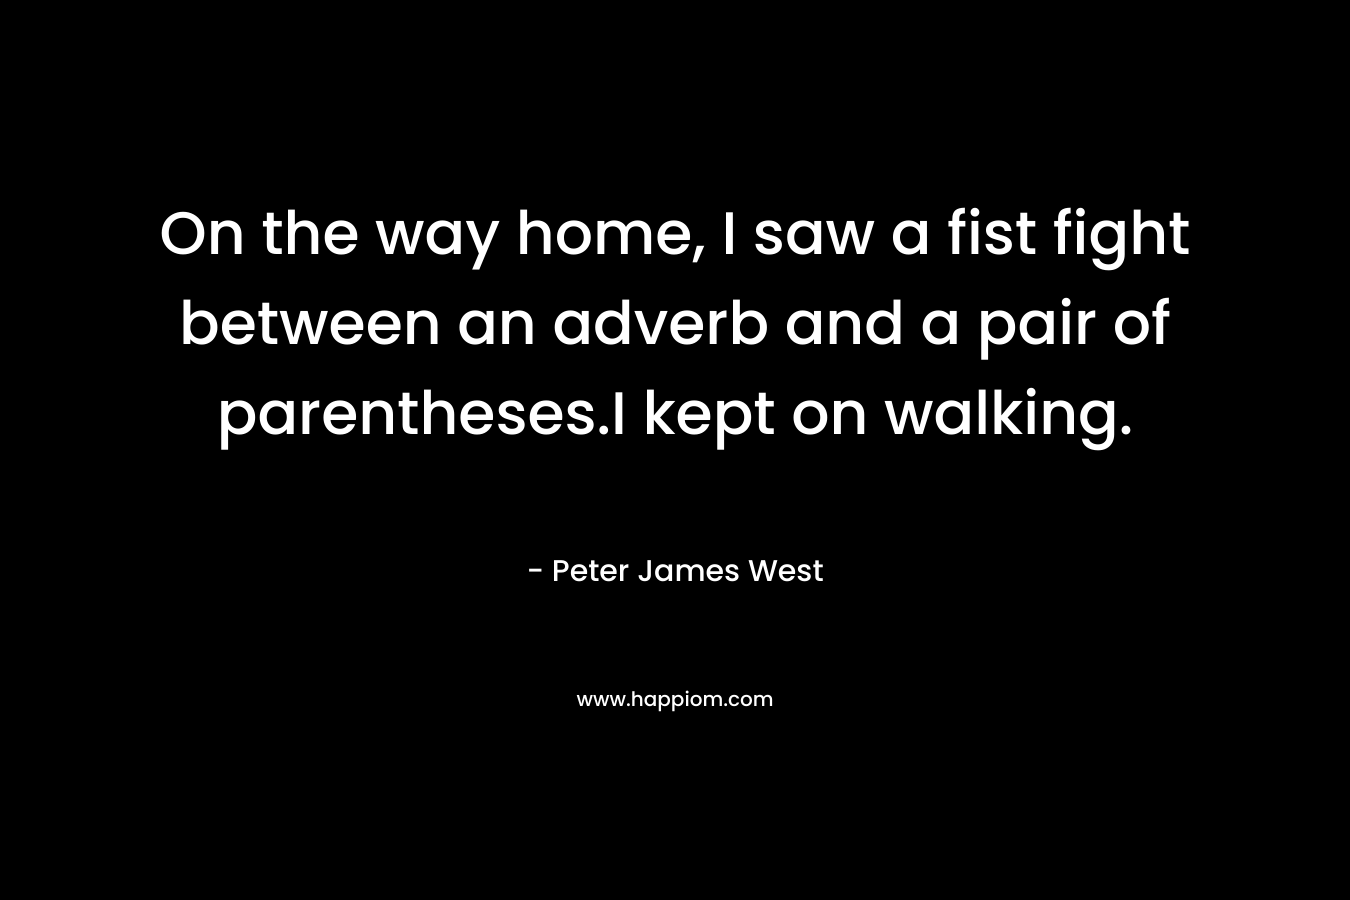 On the way home, I saw a fist fight between an adverb and a pair of parentheses.I kept on walking.